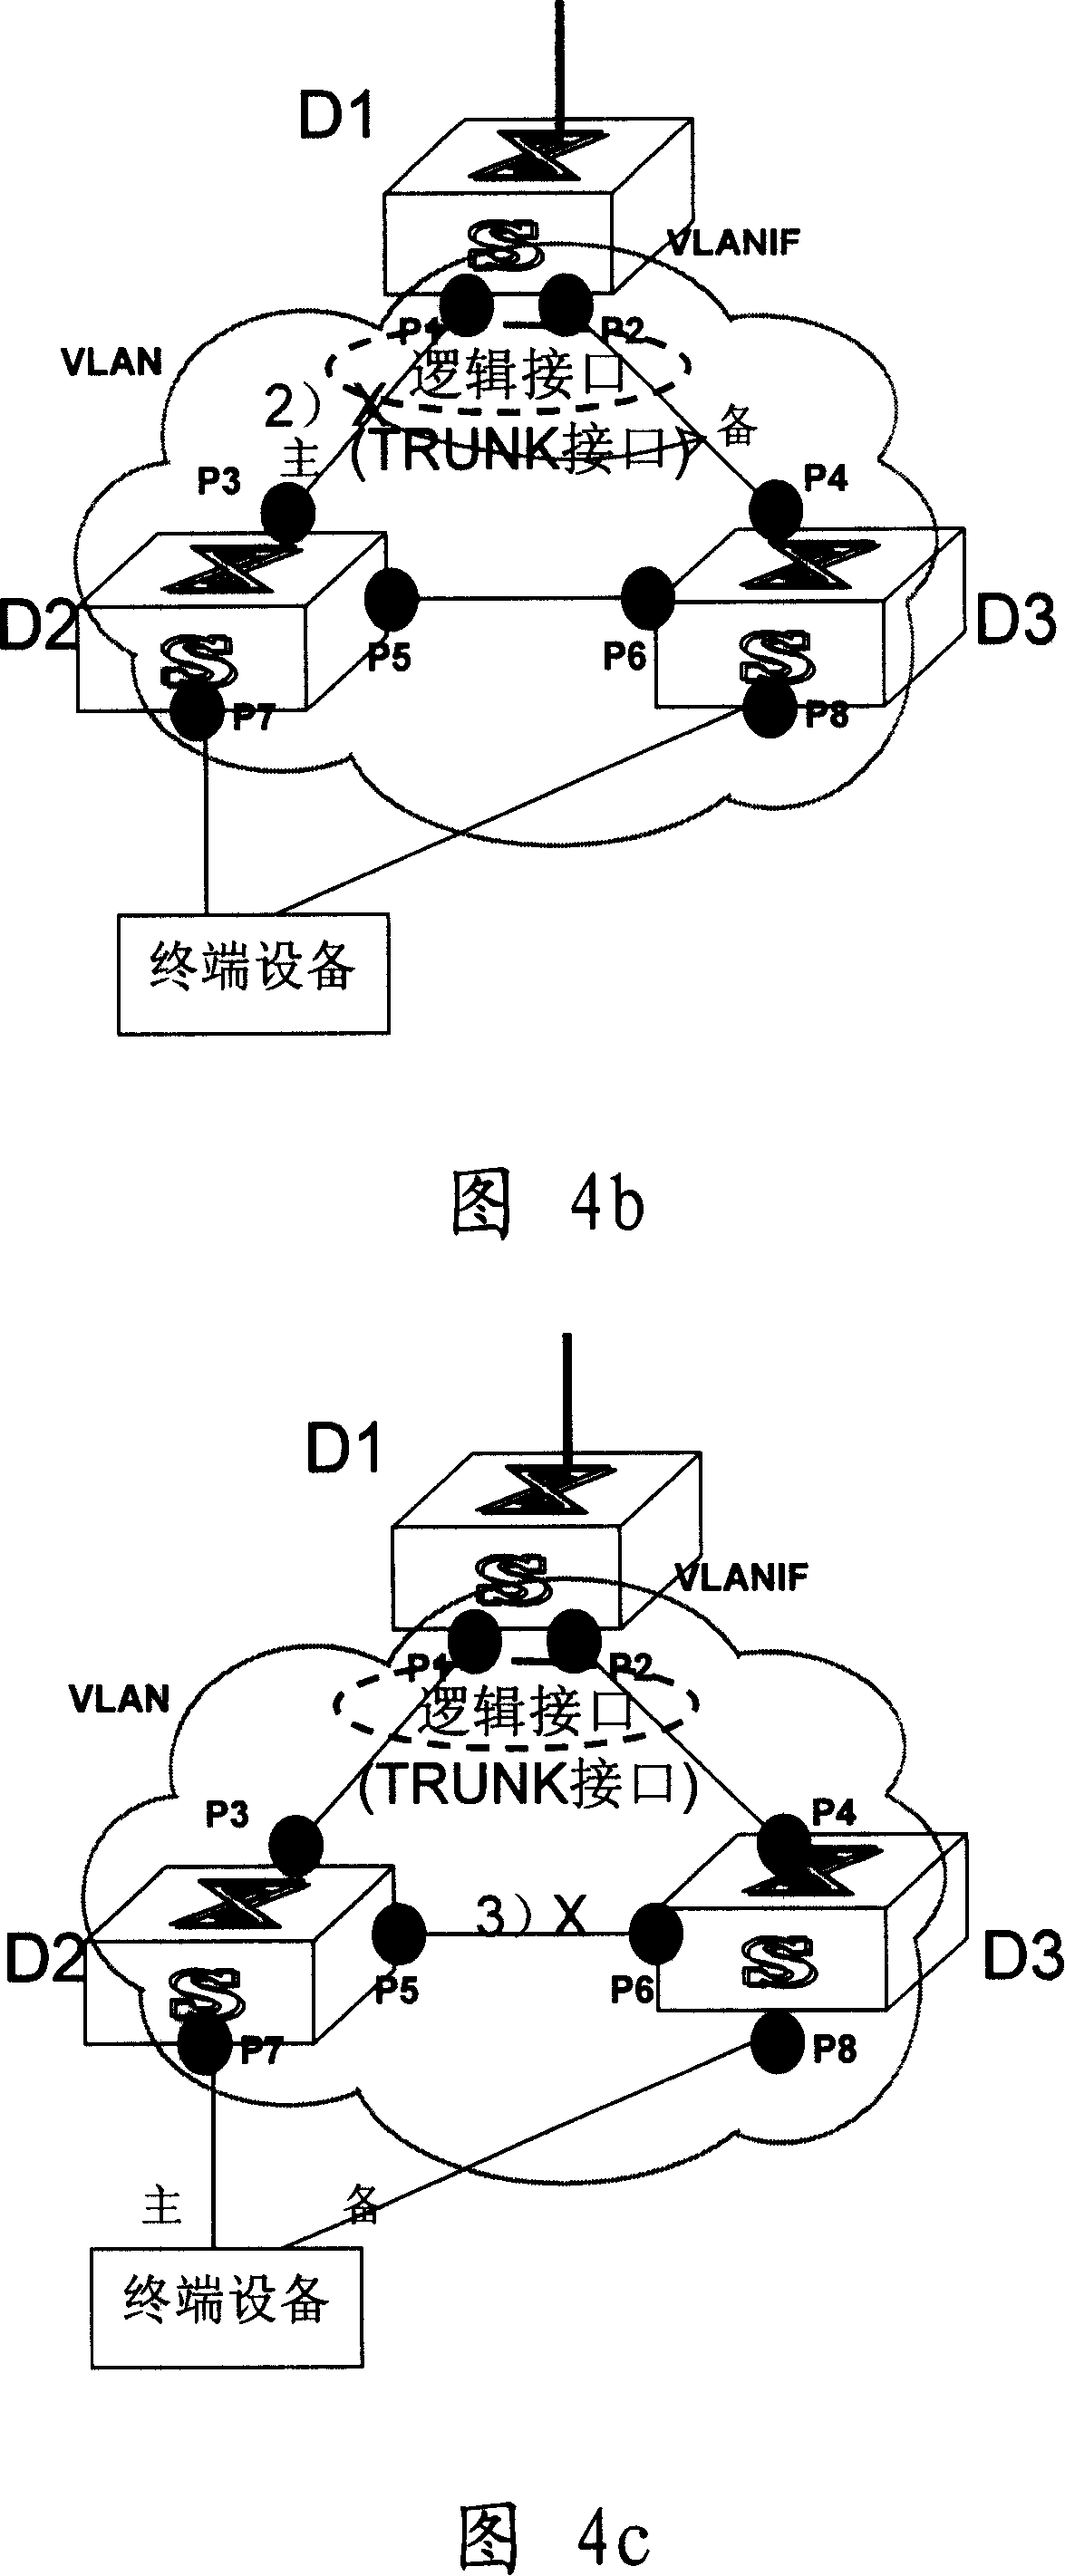 Ethernet switching system and equipment